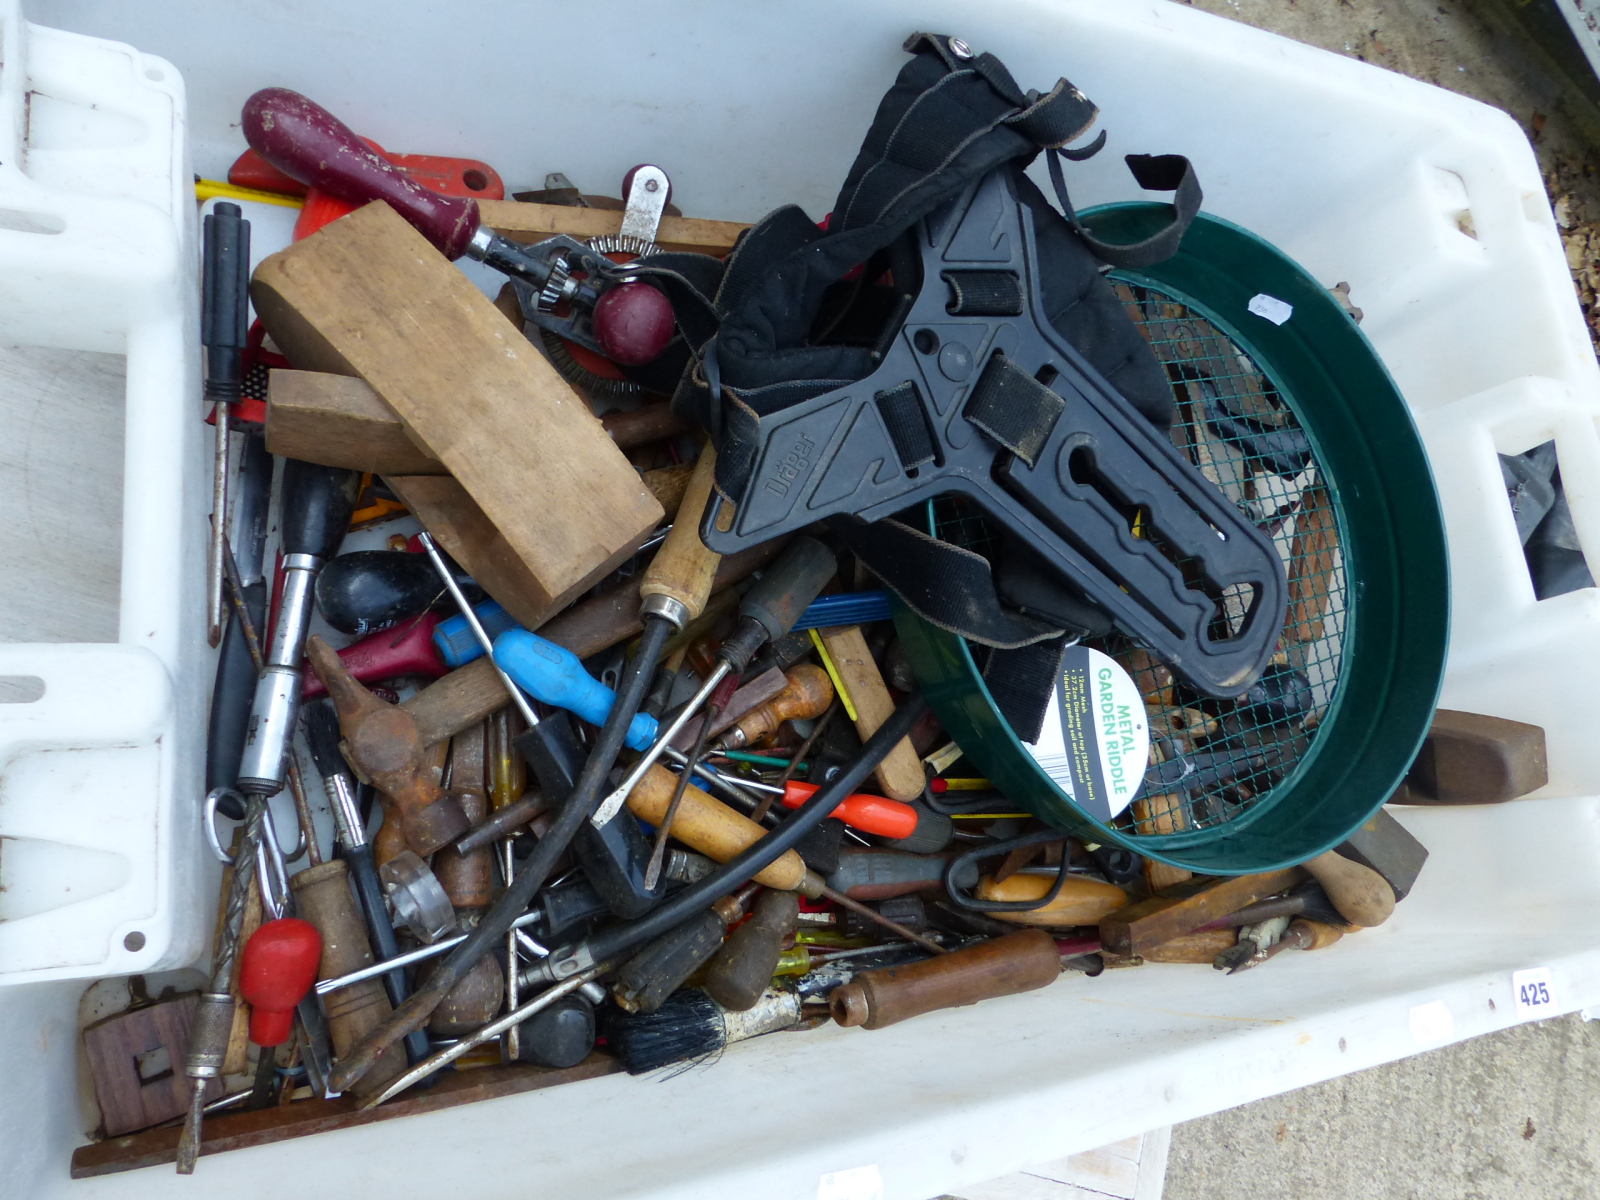 A BOX OF VARIOUS WOOD WORKING TOOLS, ETC.